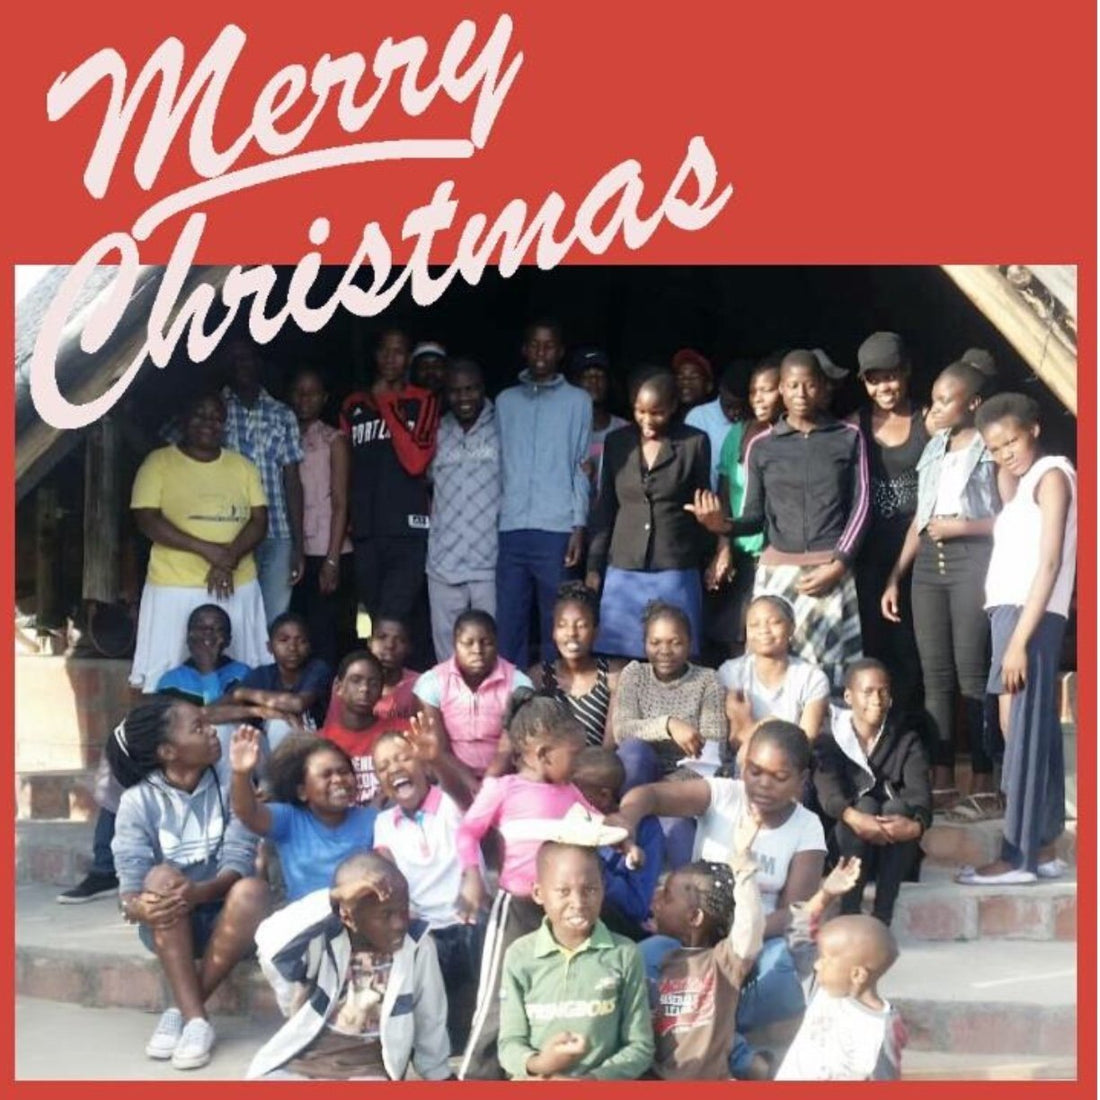 Merry Christmas from the Children and family from Peniel - Zazzy Bandz